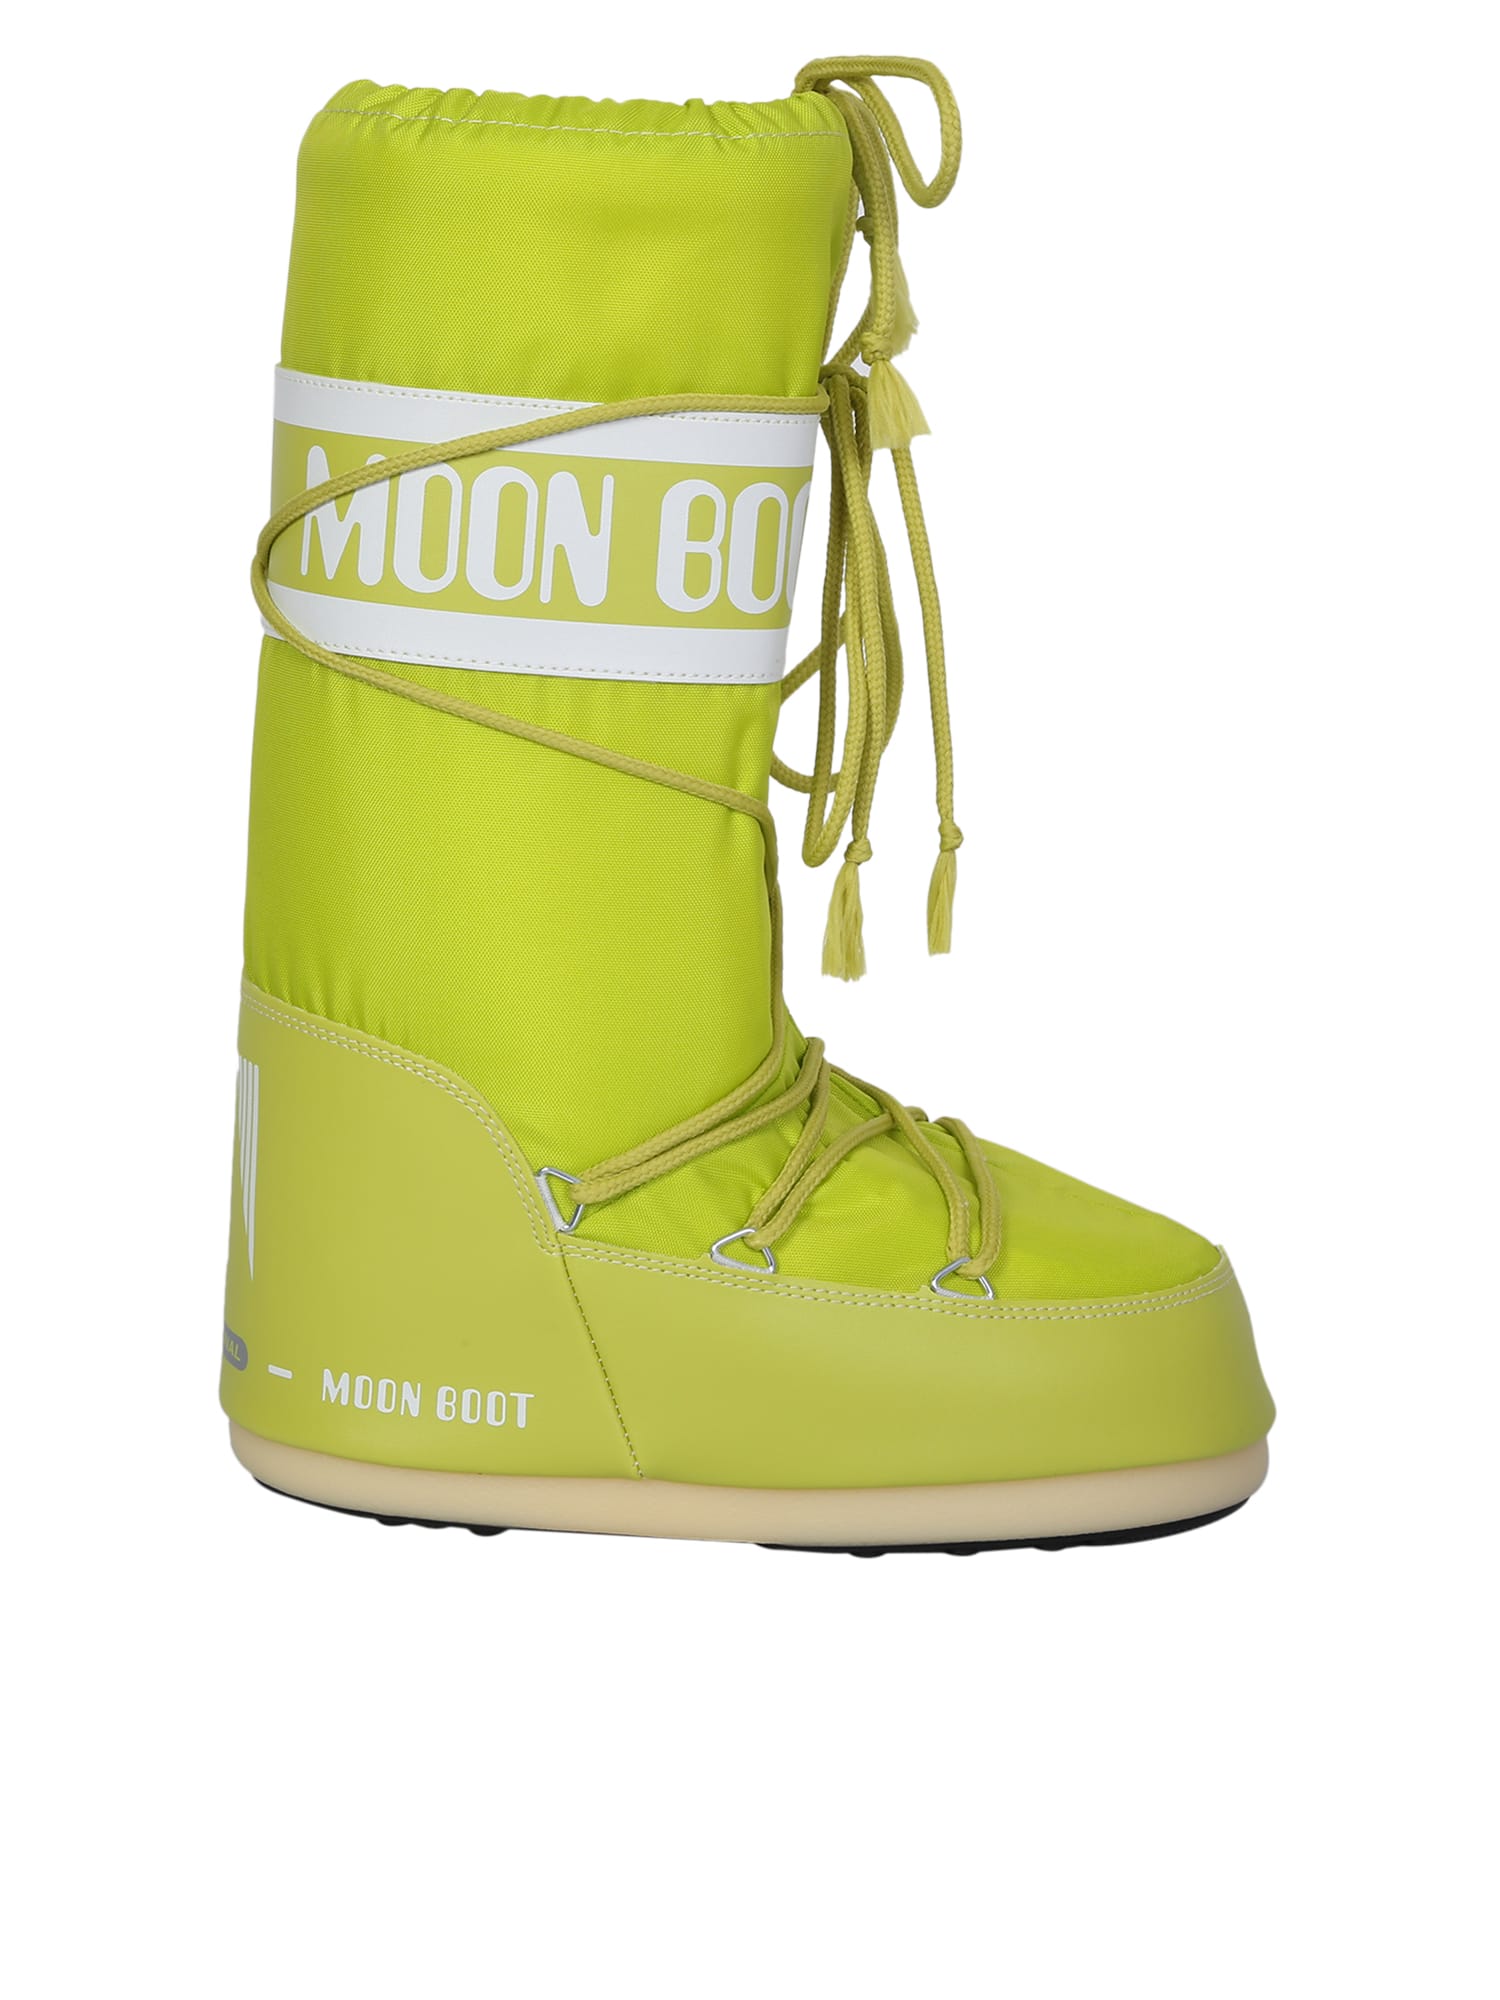 MOON BOOT LIME ICON BOOTS